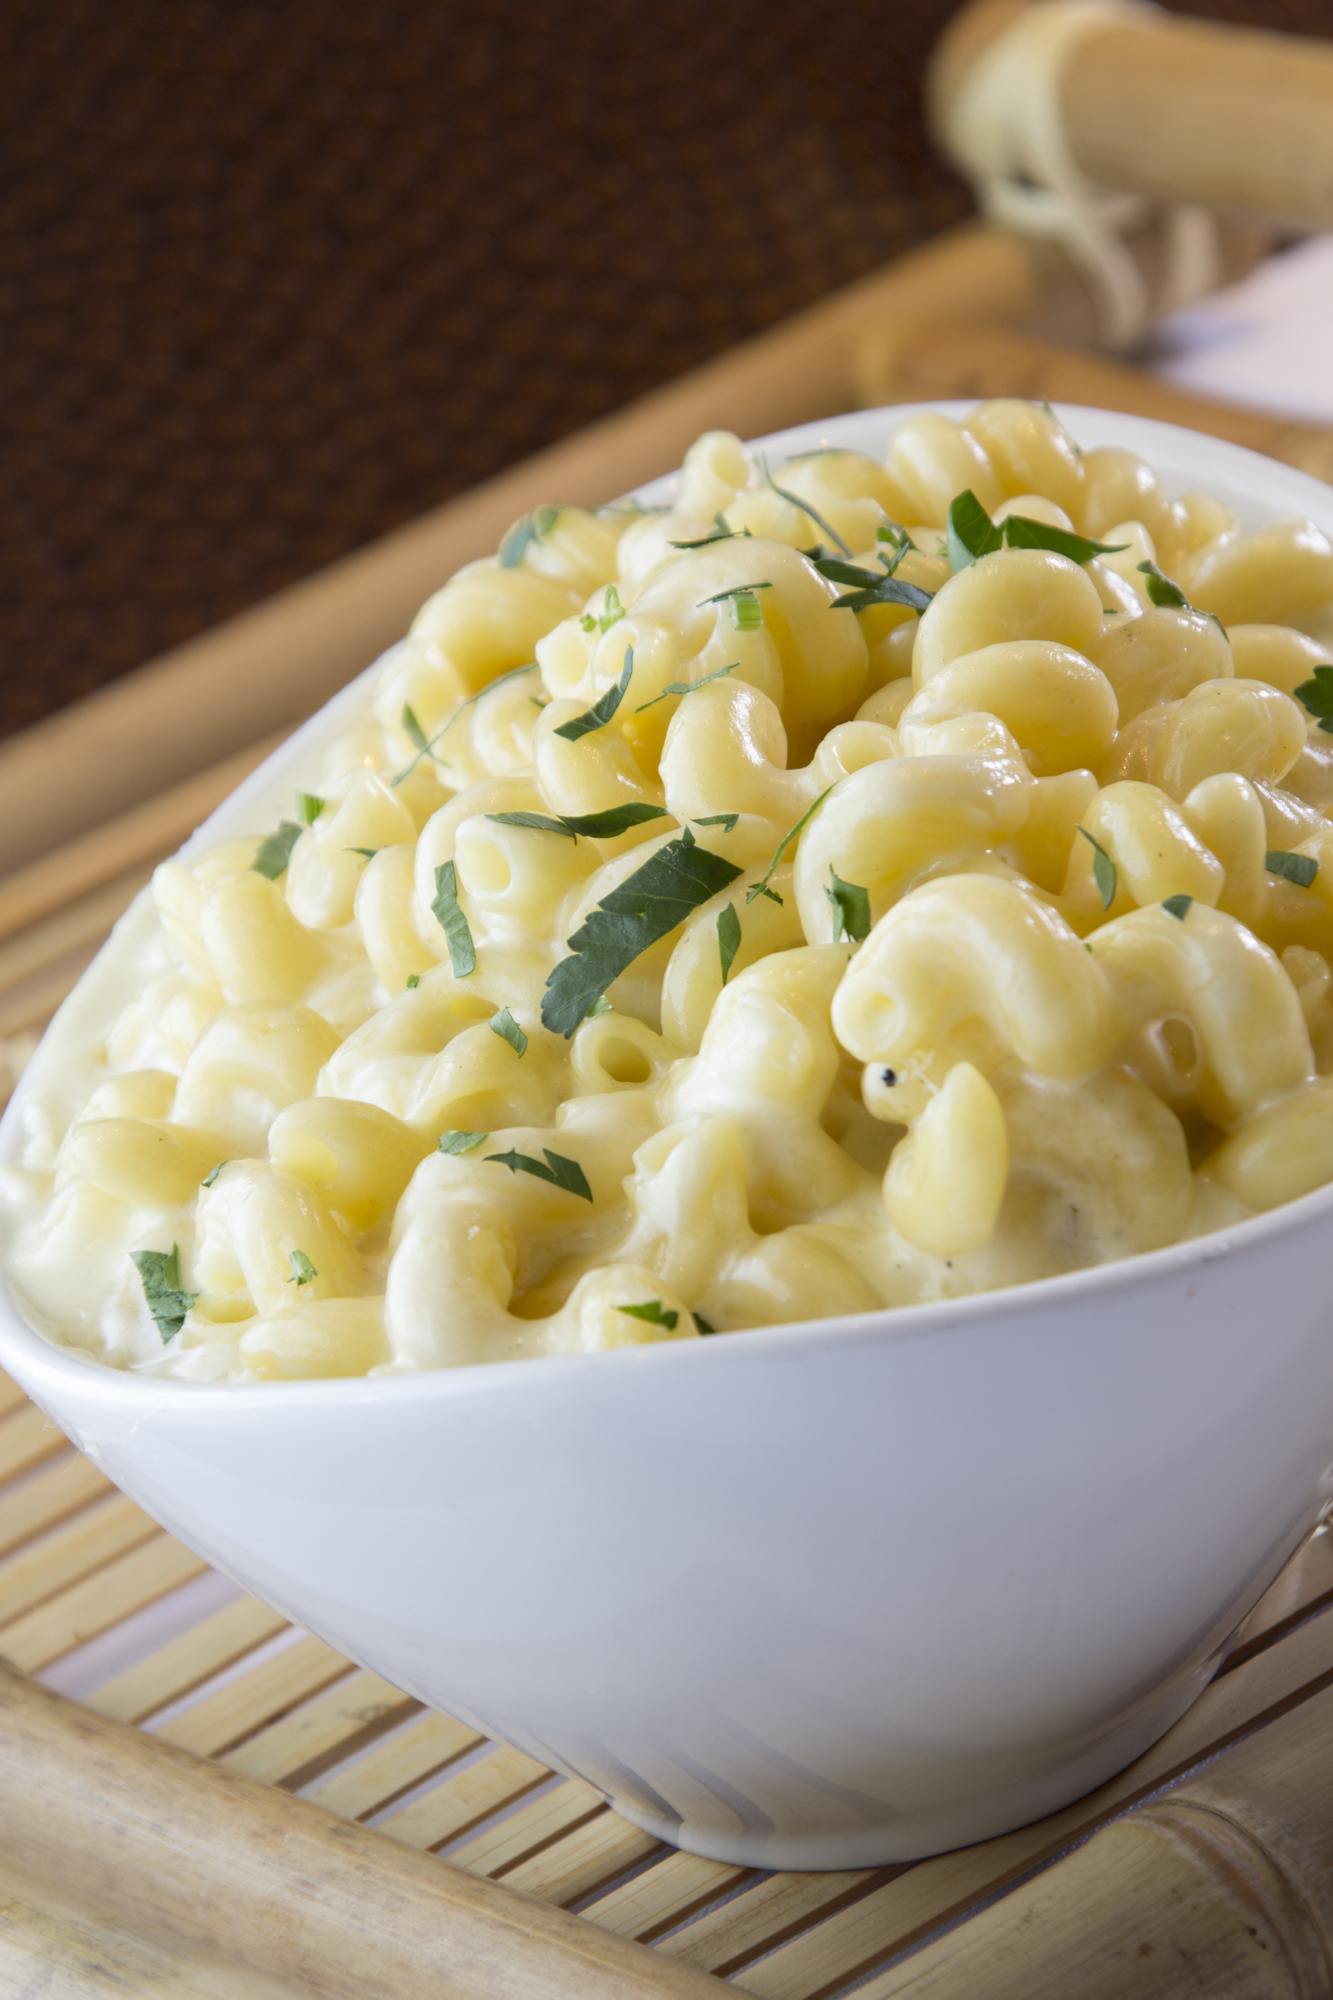 Molly’s truffled macaroni and cheese is one of several popular items on the Michael’s On East menu available on Christmas Eve and day. Photo courtesy Michael's On East